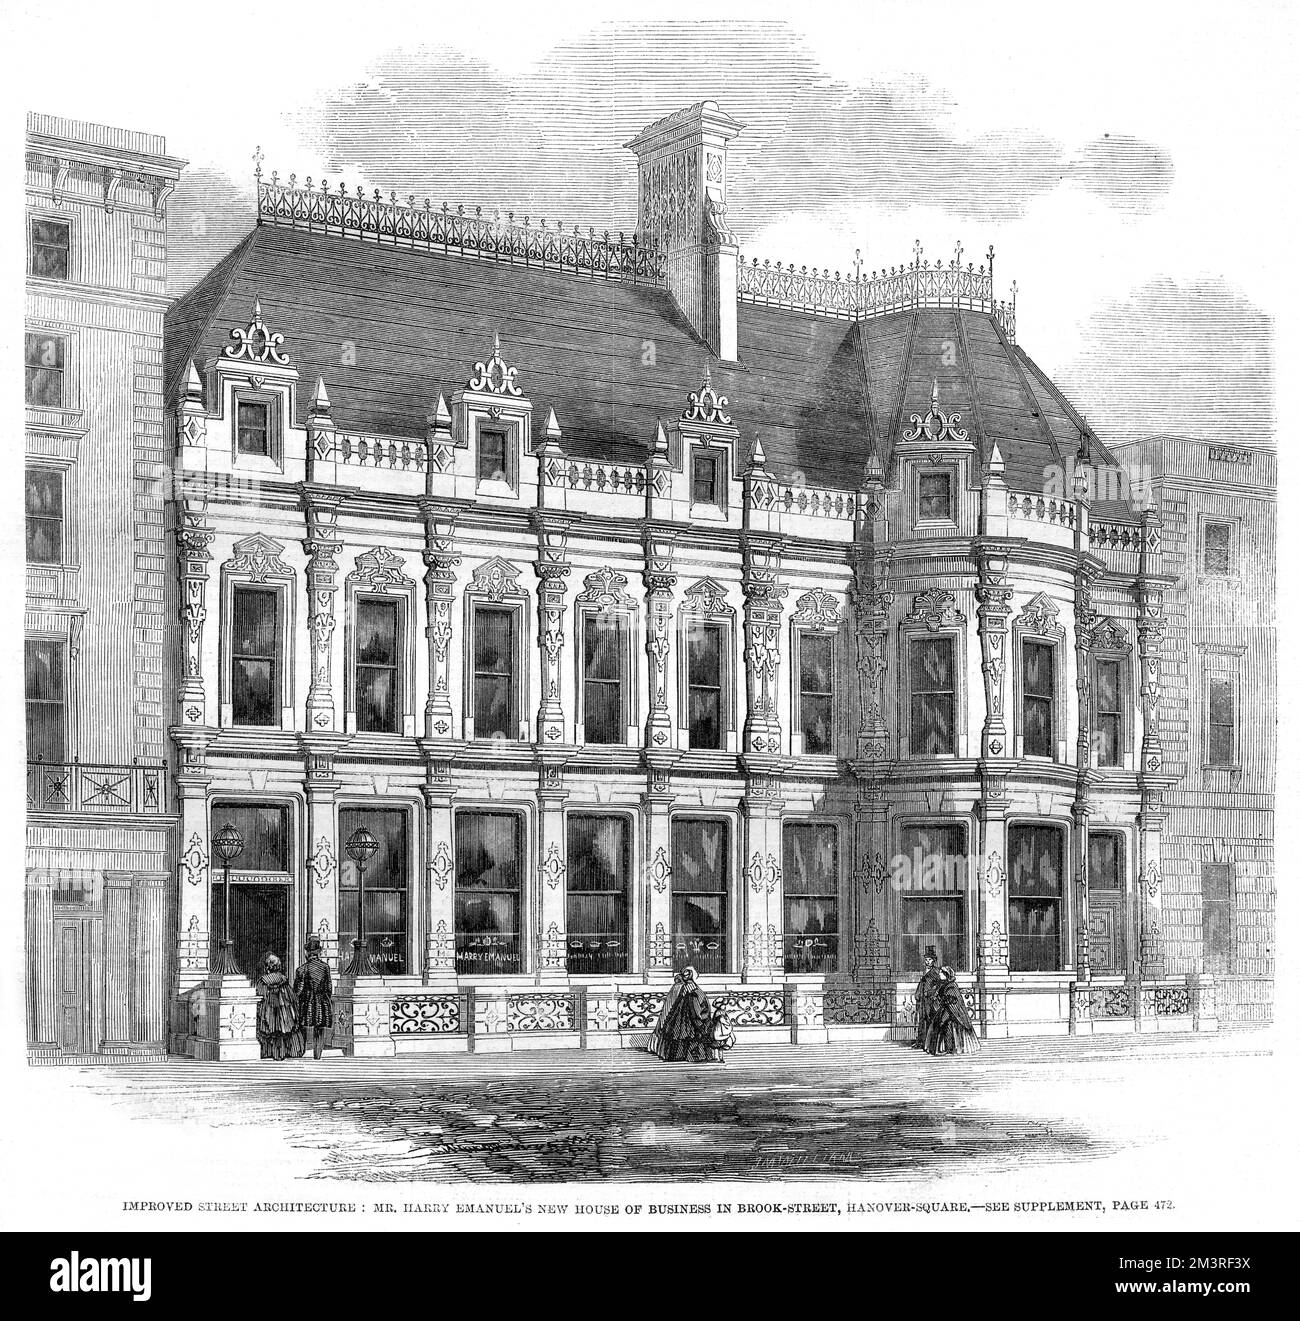 Improved street architecture: Mr Harry Emanuel's new house of business in Brook Street, Hanover Square, London W1, in 1860.     Date: 1860 Stock Photo